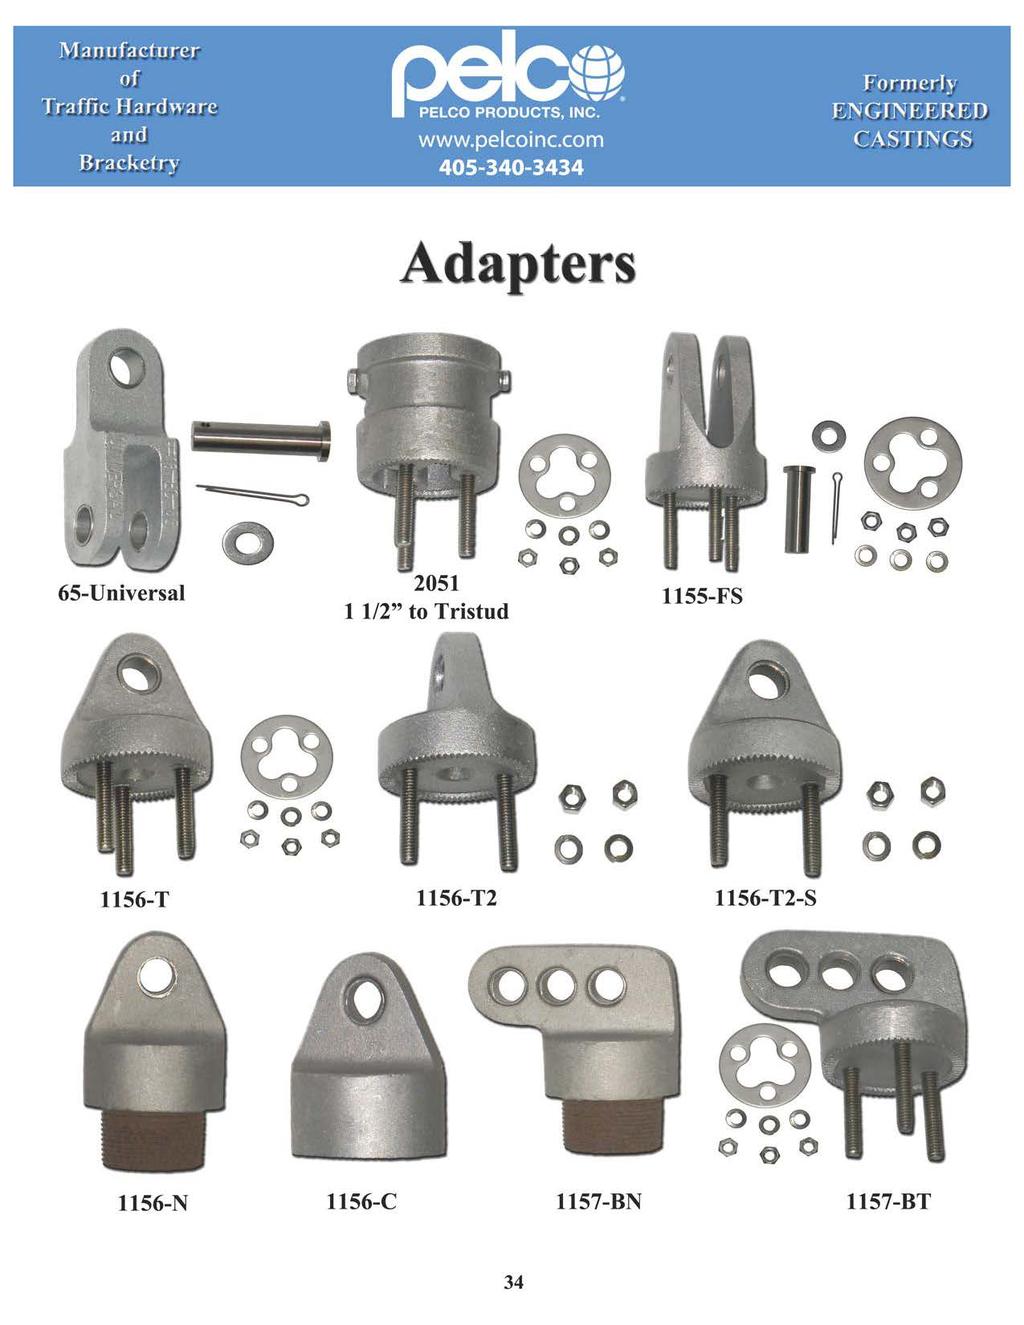 Br:acketry Adapters 65-Universal 251 1 1/2" to Tristud OoO 1155-FS